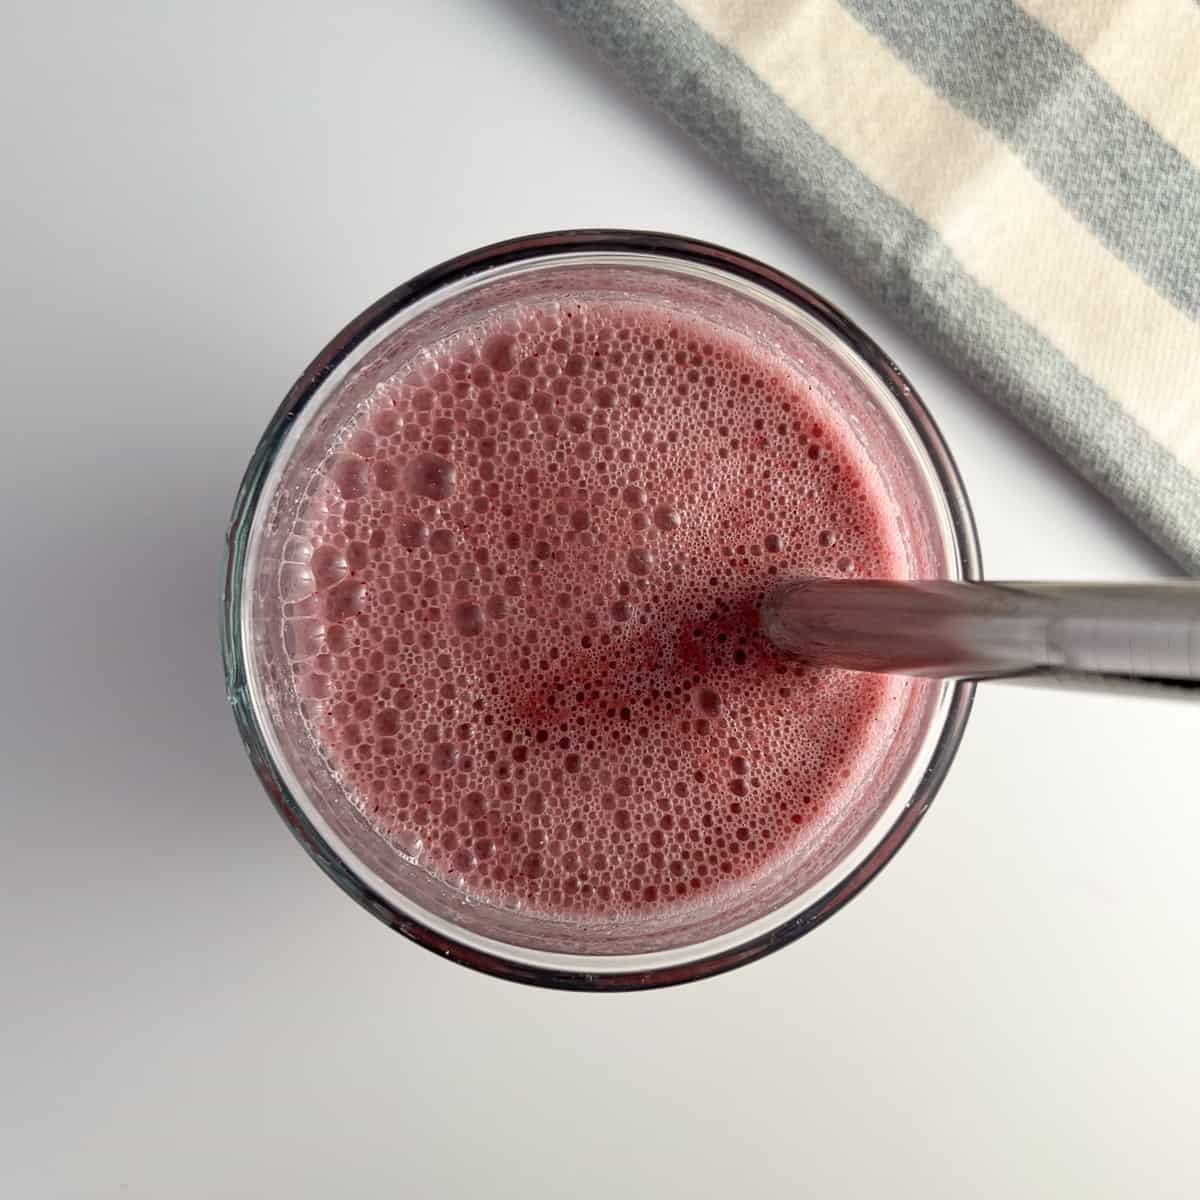 top view close up of pineapple weight loss smoothie in a glass with metal straw; striped blue and white towel on the side